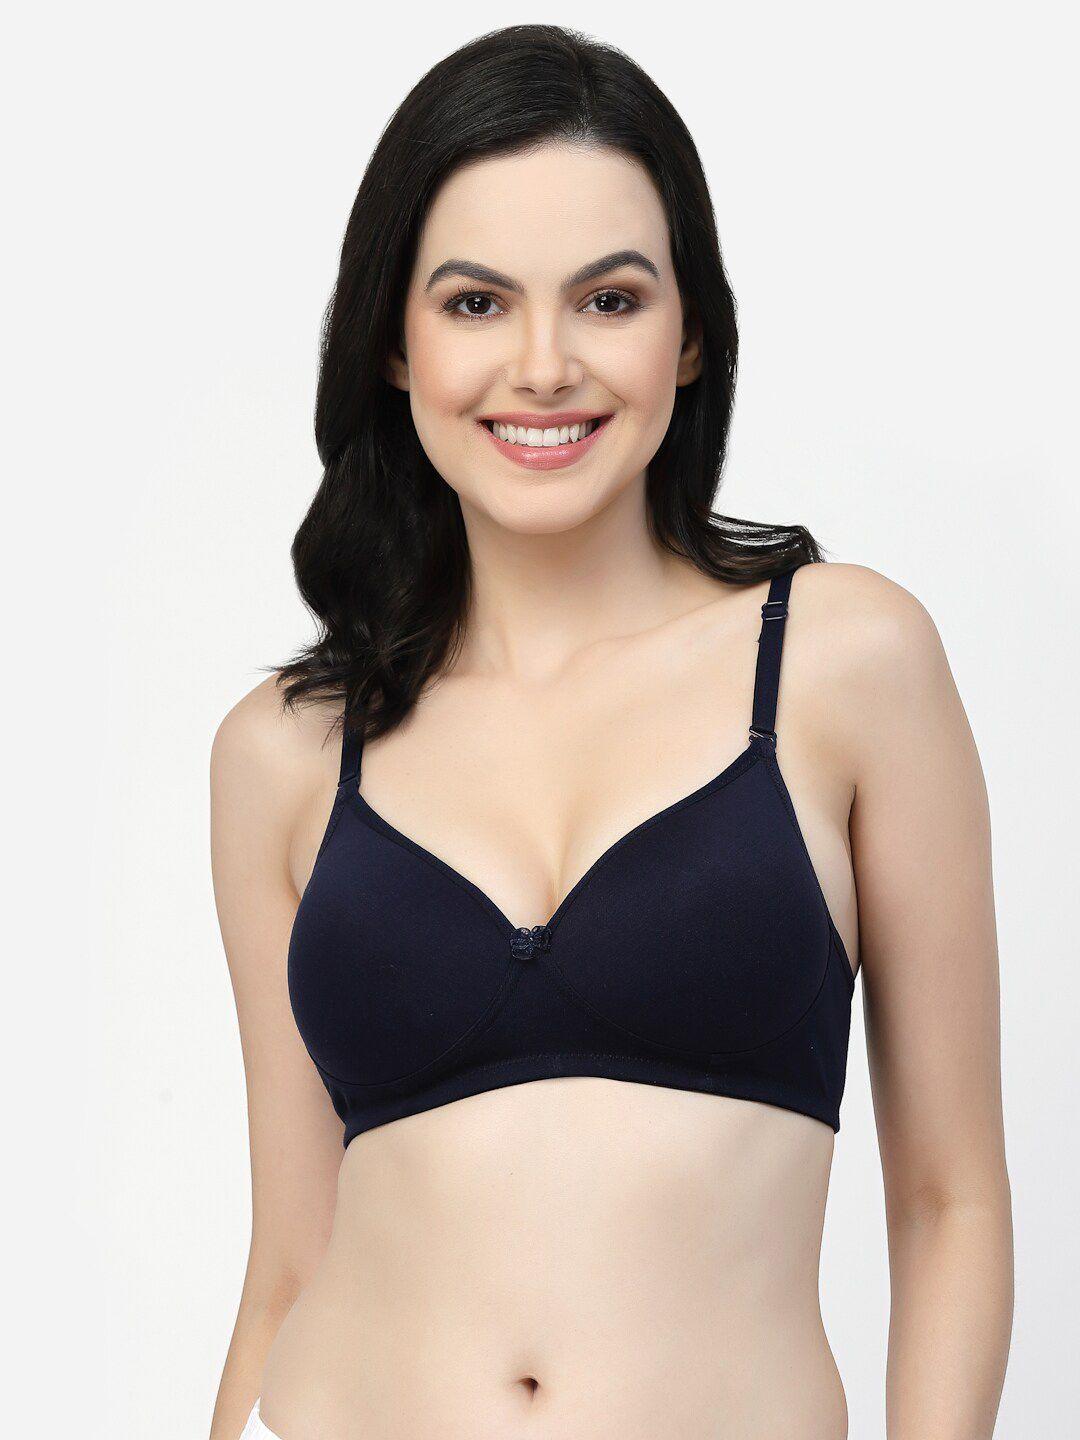 Floret Full Coverage Lightly Padded Non-Wired Super Support T-Shirt Bra